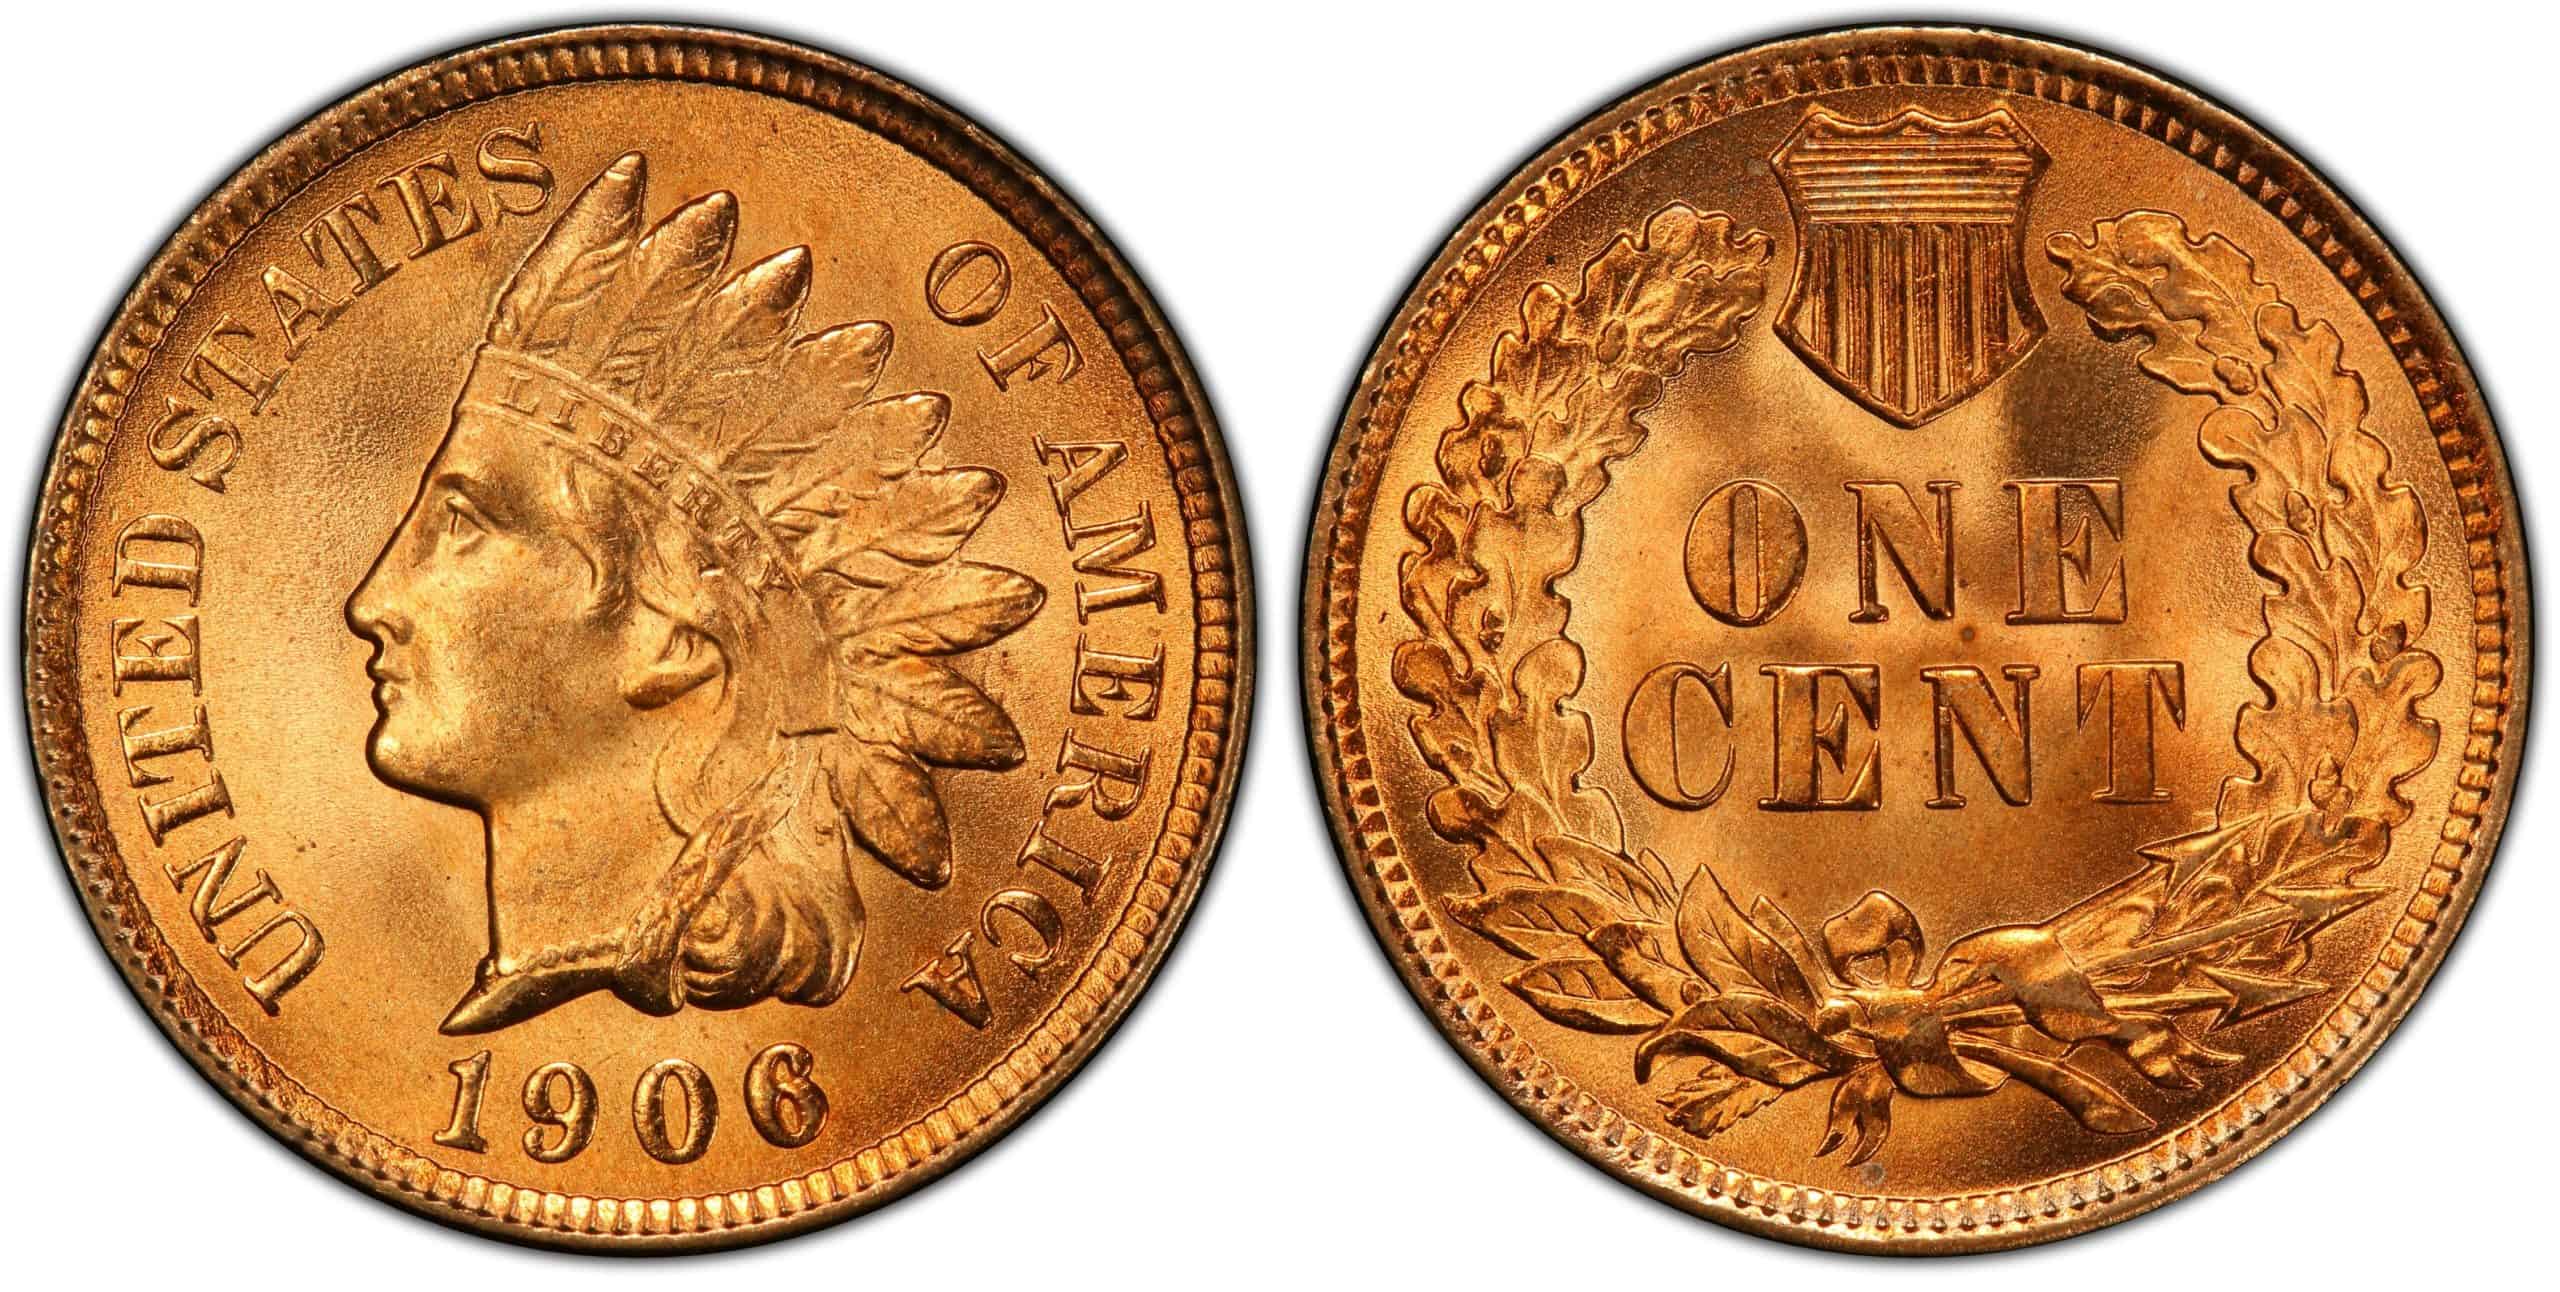 What Is a 1906 Indian Head Penny